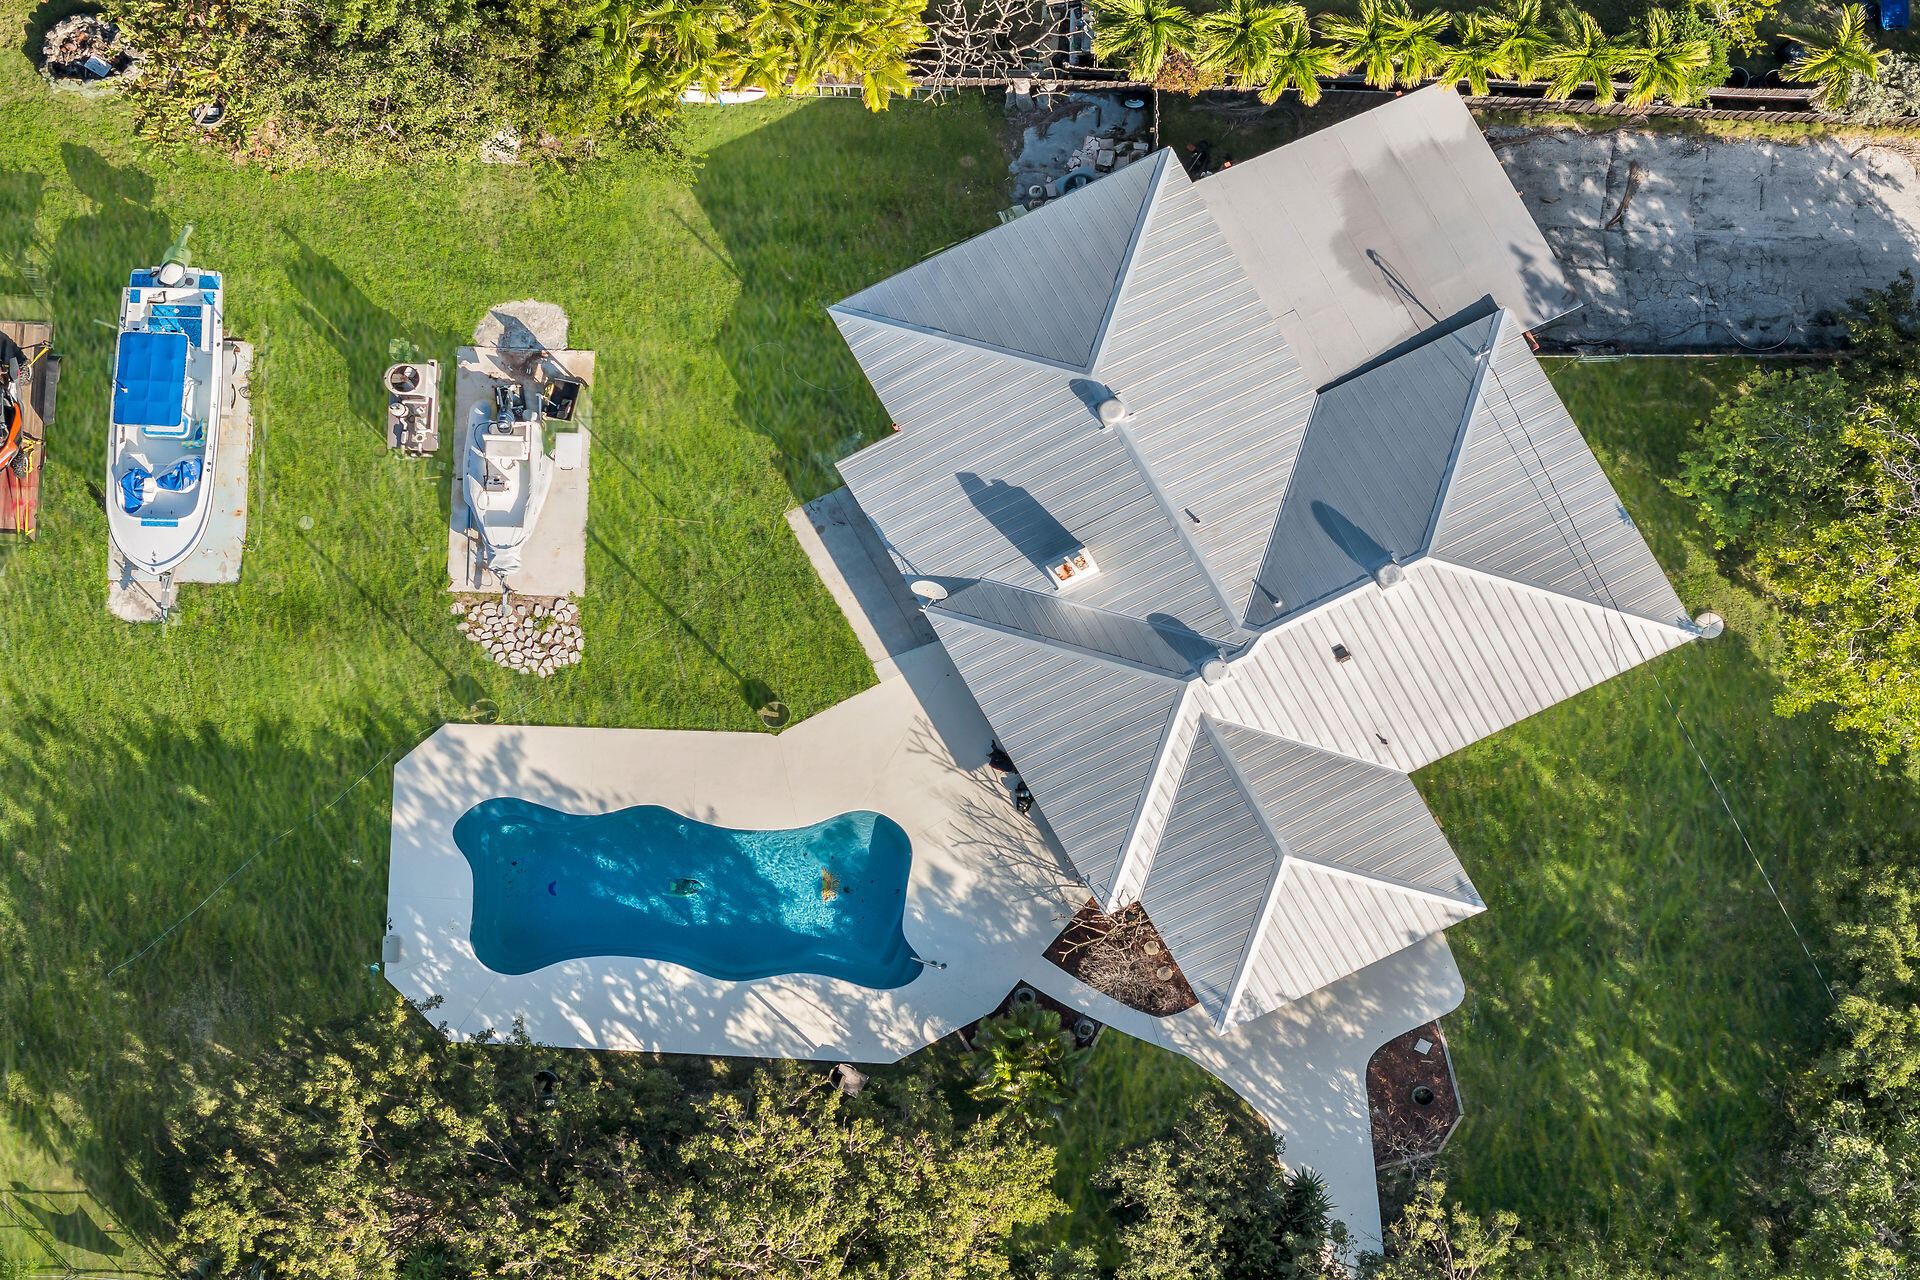 an aerial view of a house with outdoor space patio and swimming pool